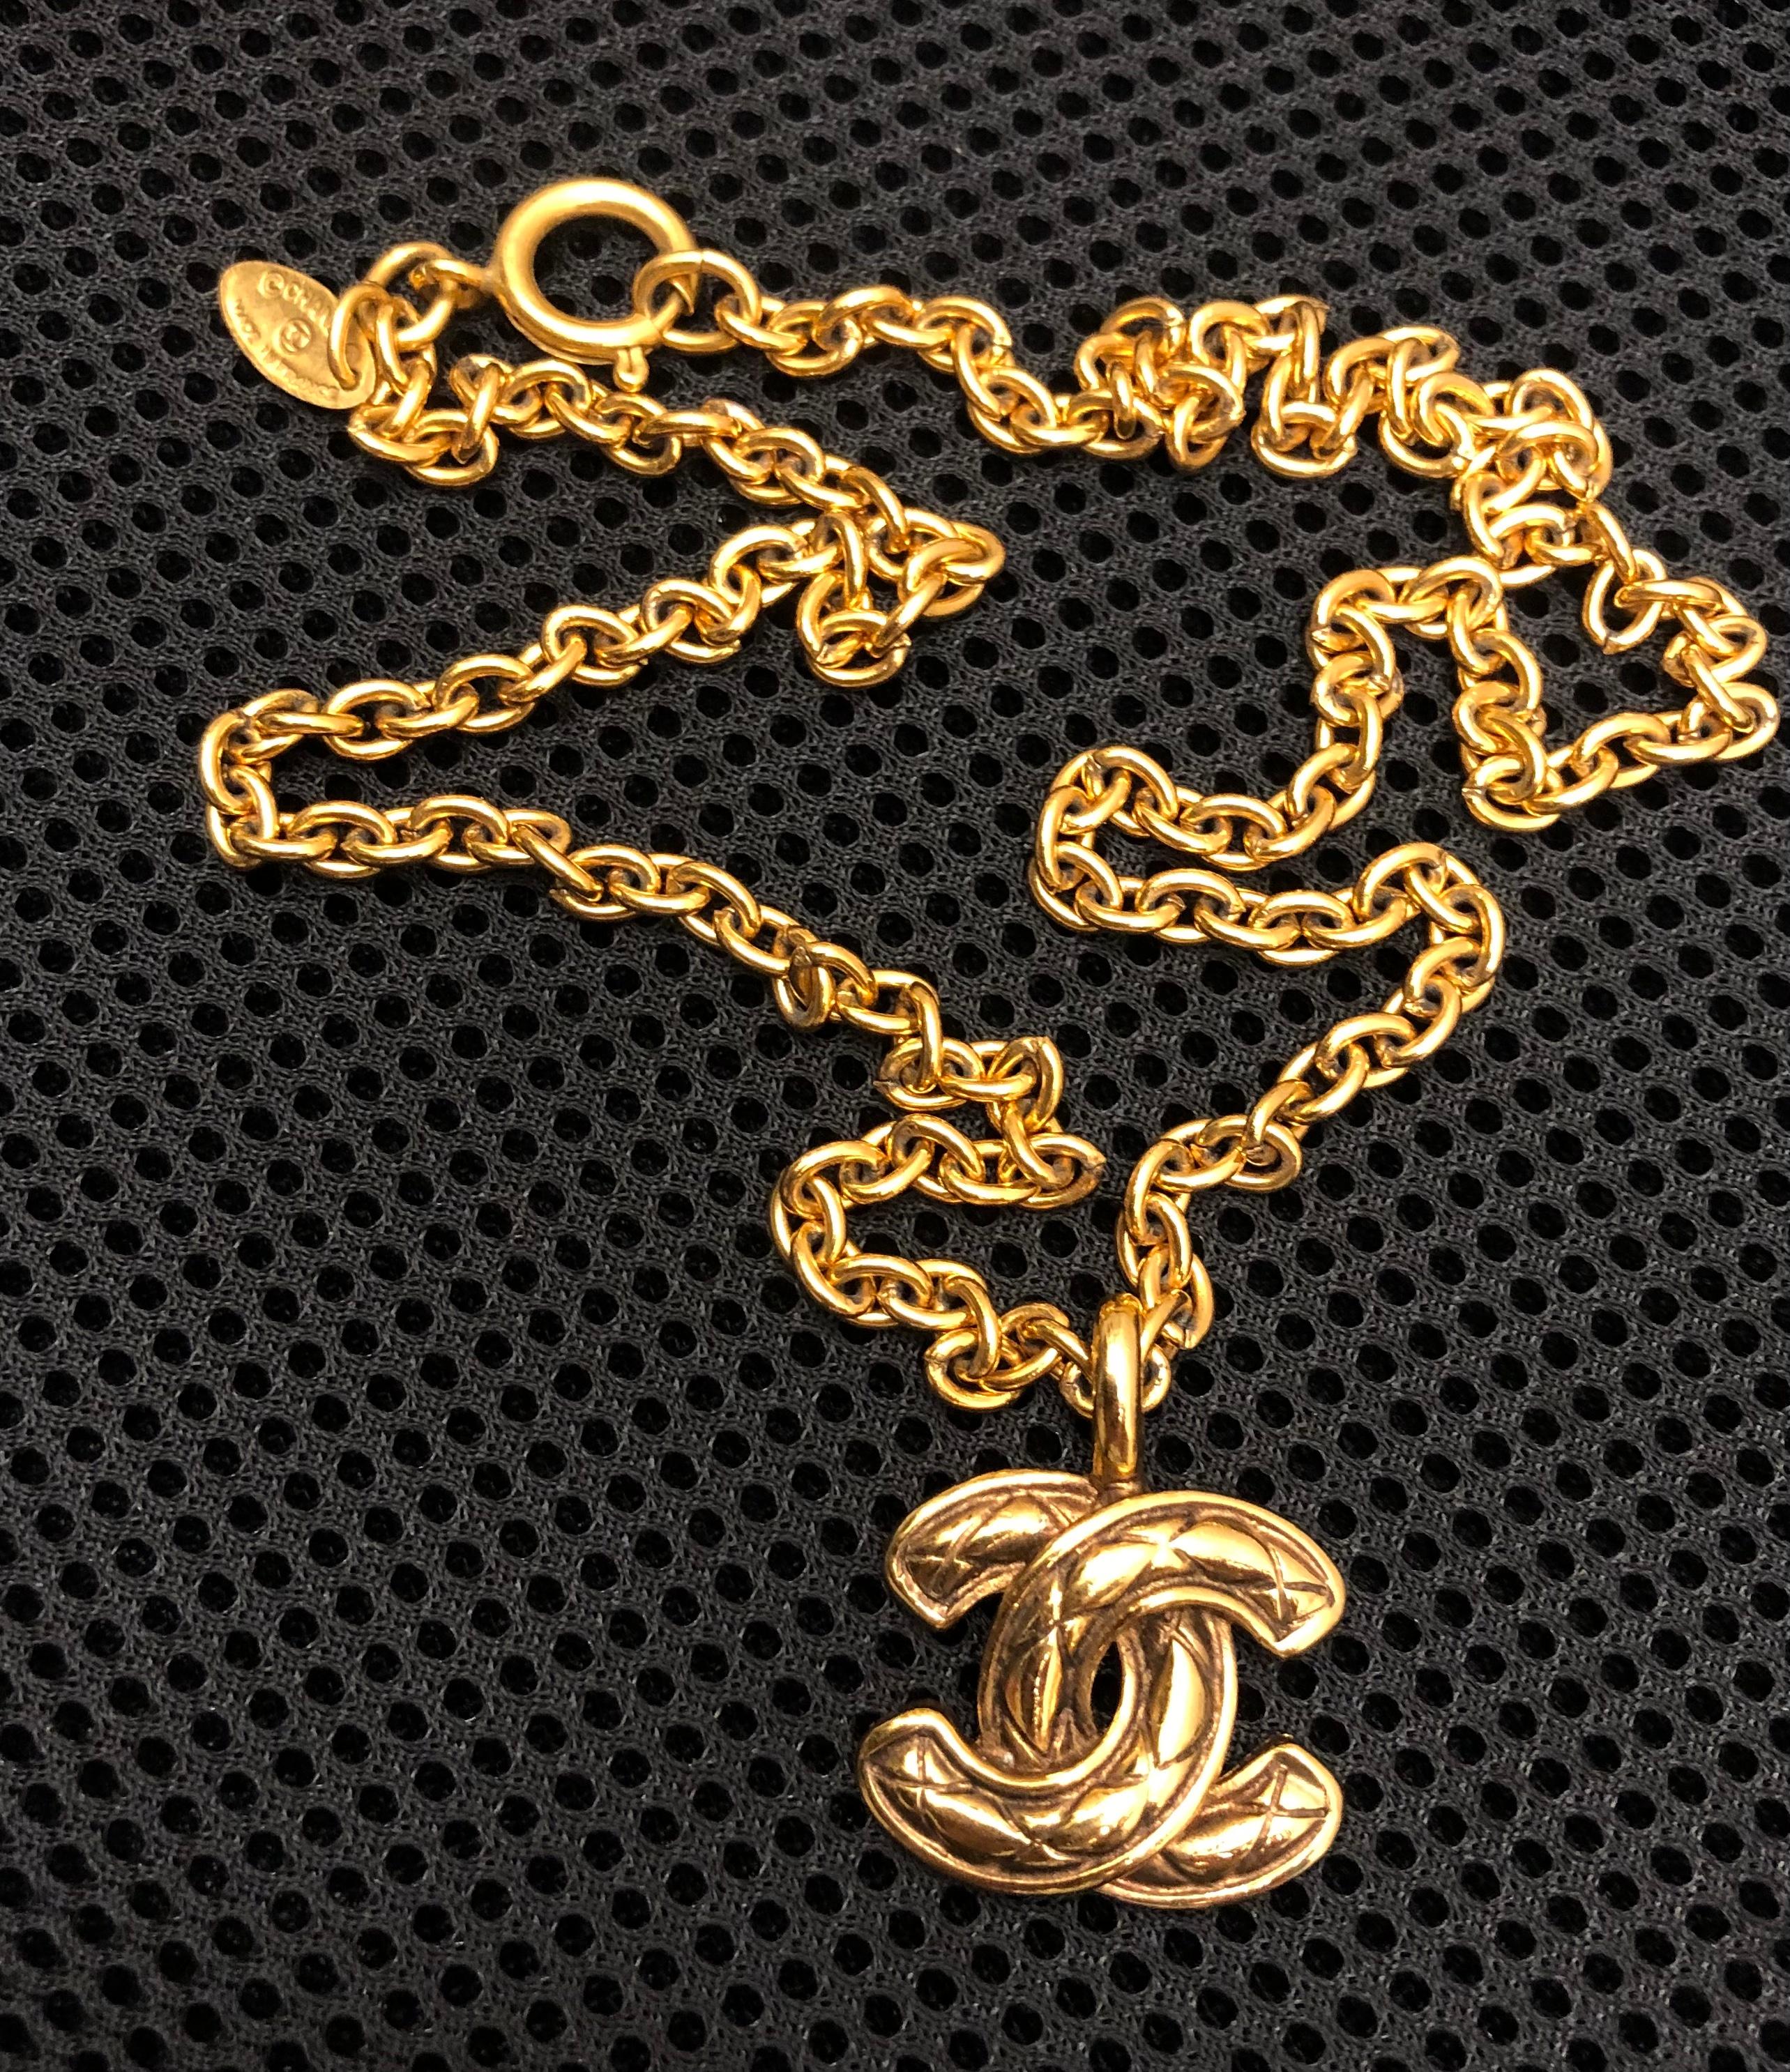 This 1980s vintage Chanel gold toned chain necklace is crafted of gold toned chain featuring an iconic gold toned quilted CC charm. The is the smallest of the quilted CC series. Stamped CHANEL made in France. Spring ring closure. Measures